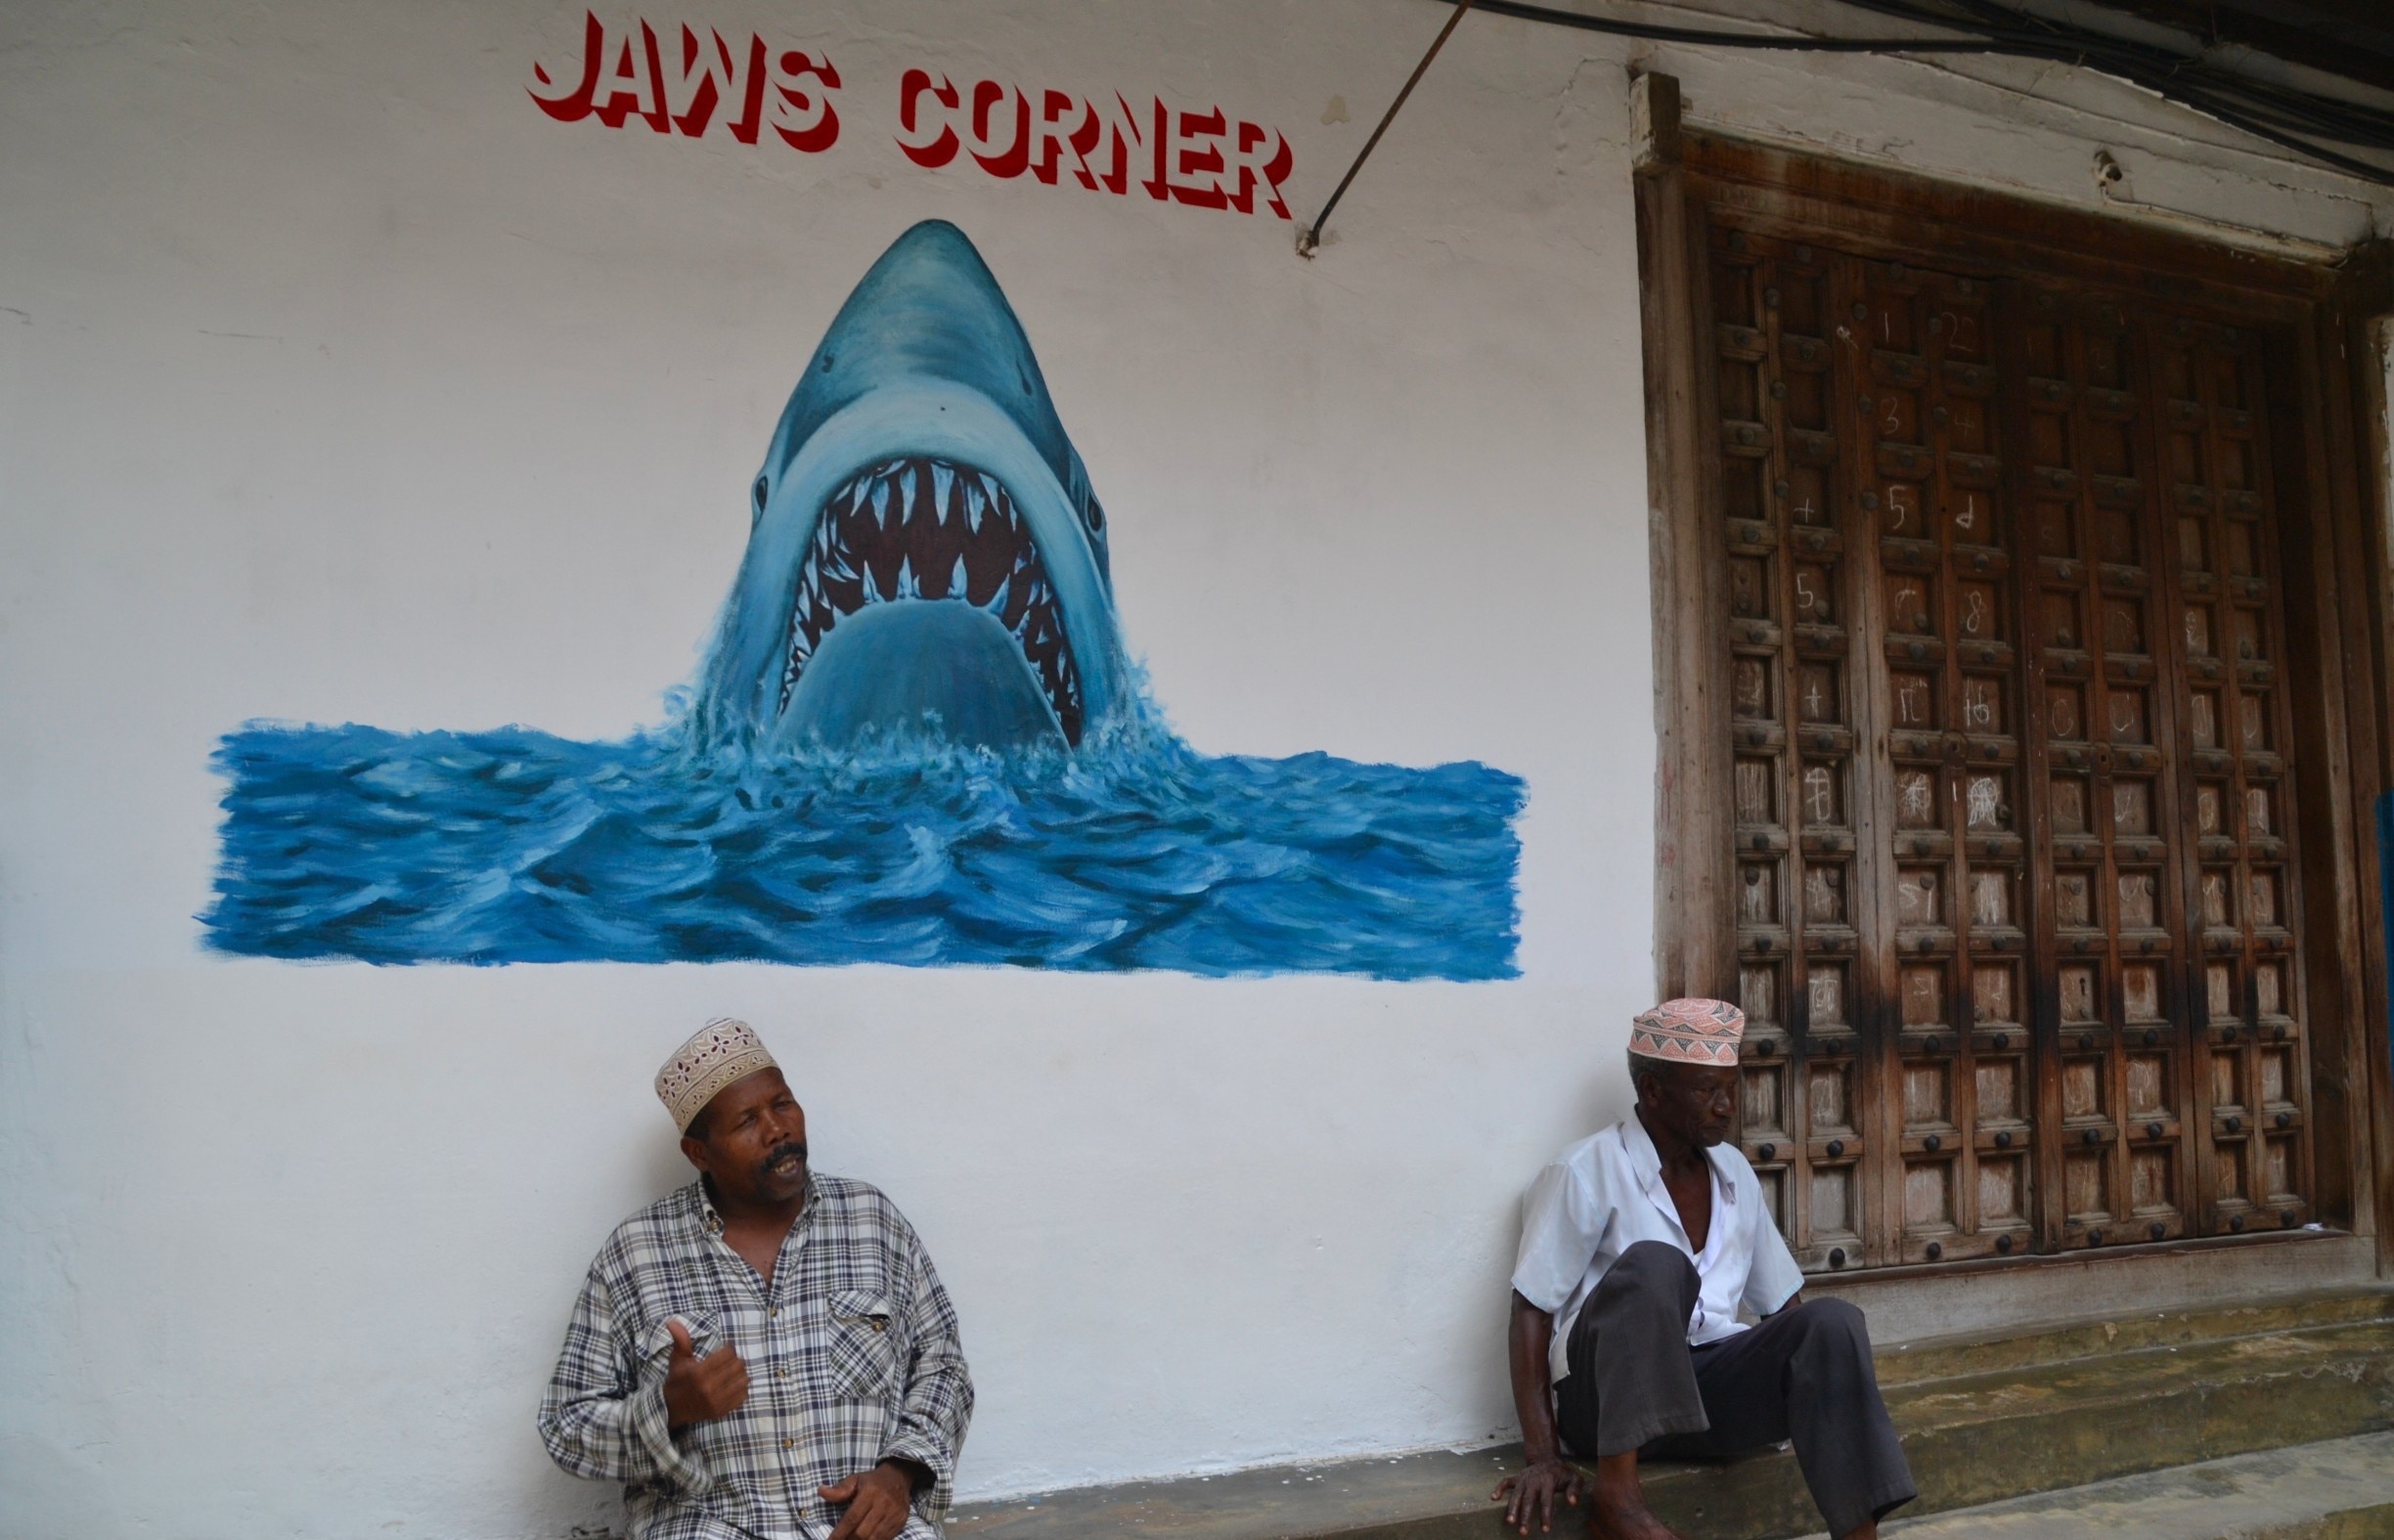 Jaws corner is a place where the locals gather to discuss politics and other things or just drink a cup of coffee. This corner is located somewhere in the maze like streets of Stone Town, on Zanzibar. It is a pleasure getting lost in all the tiny alleys while talking to some locals and looking at all the amazing doors and buildings.

#zanzibar #tanzania #streetart